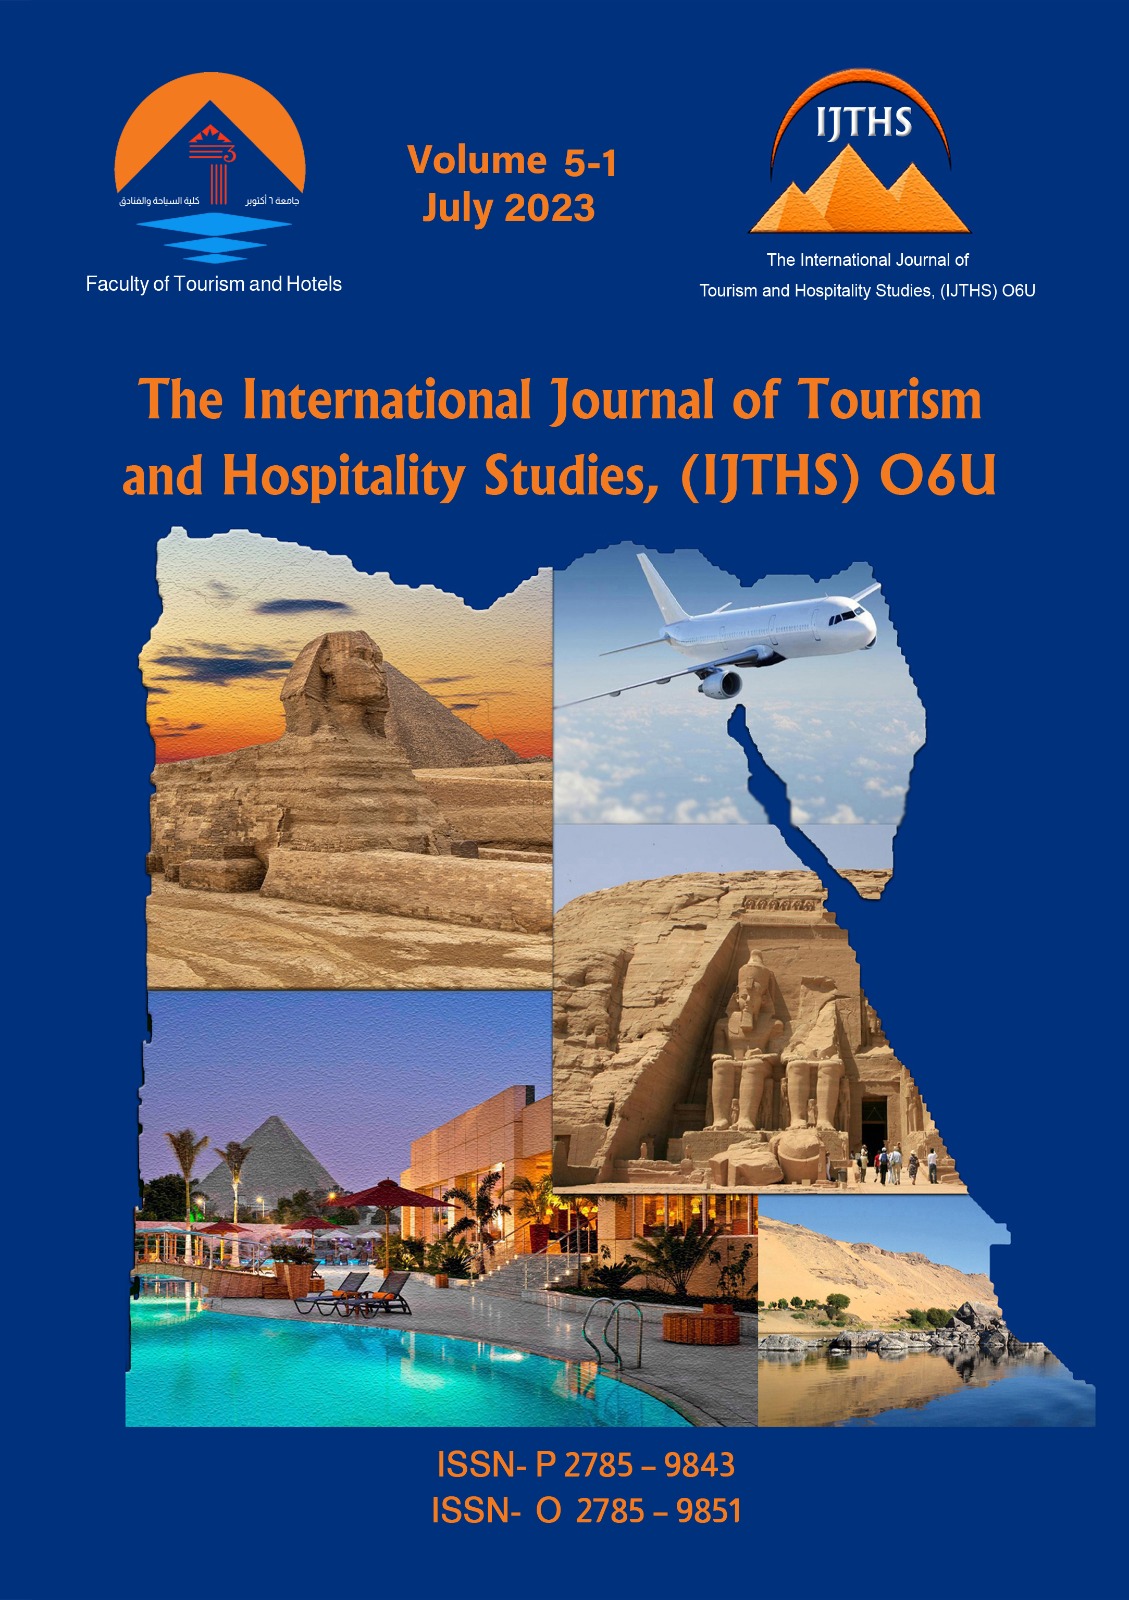 international journal of tourism and hotel management